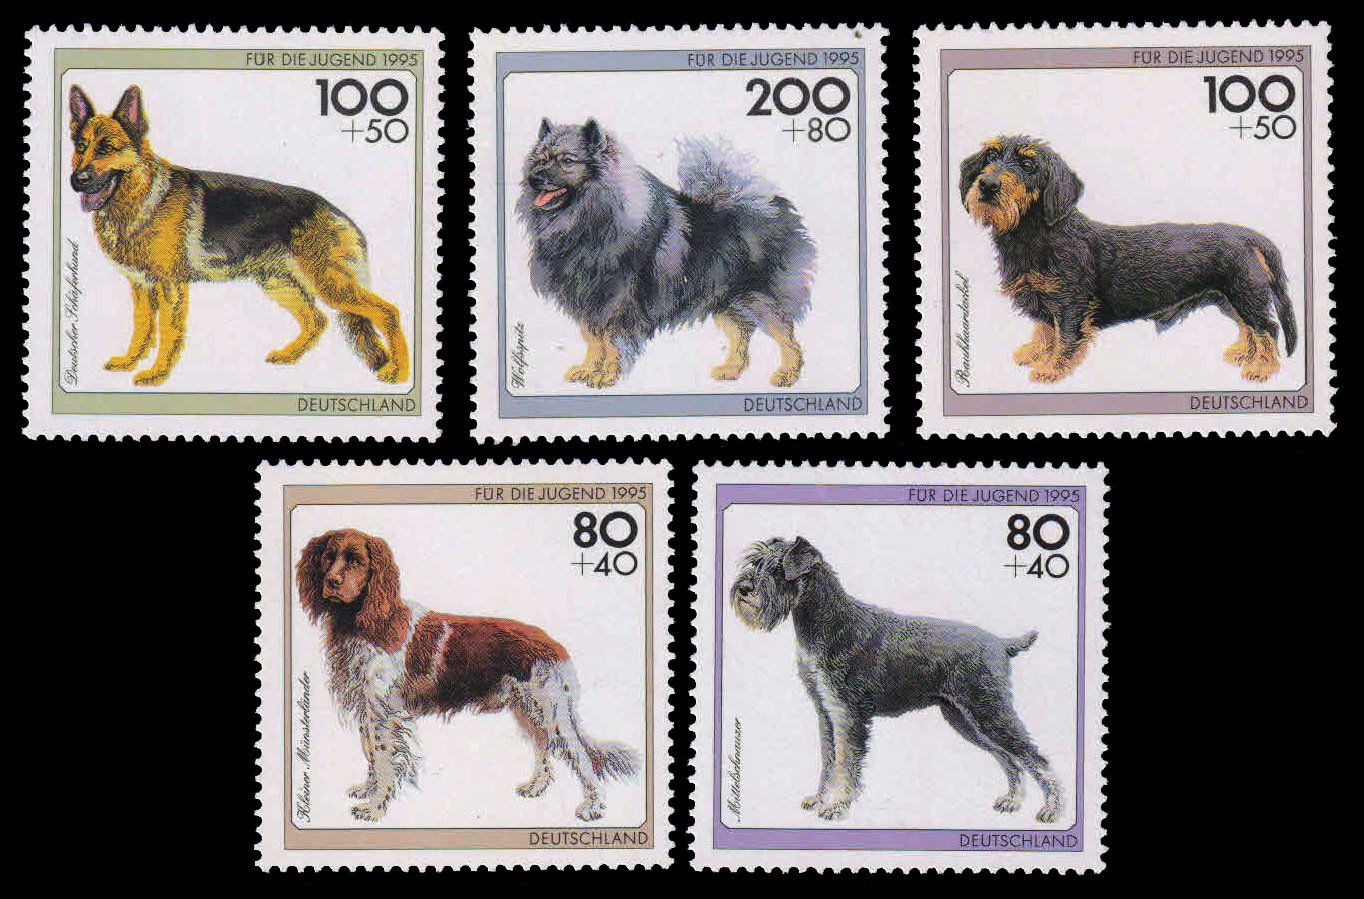 GERMANY 1995 - Dogs, Youth Welfare. Set of 5, MNH. S.G. 2640-44. Cat � 13.35